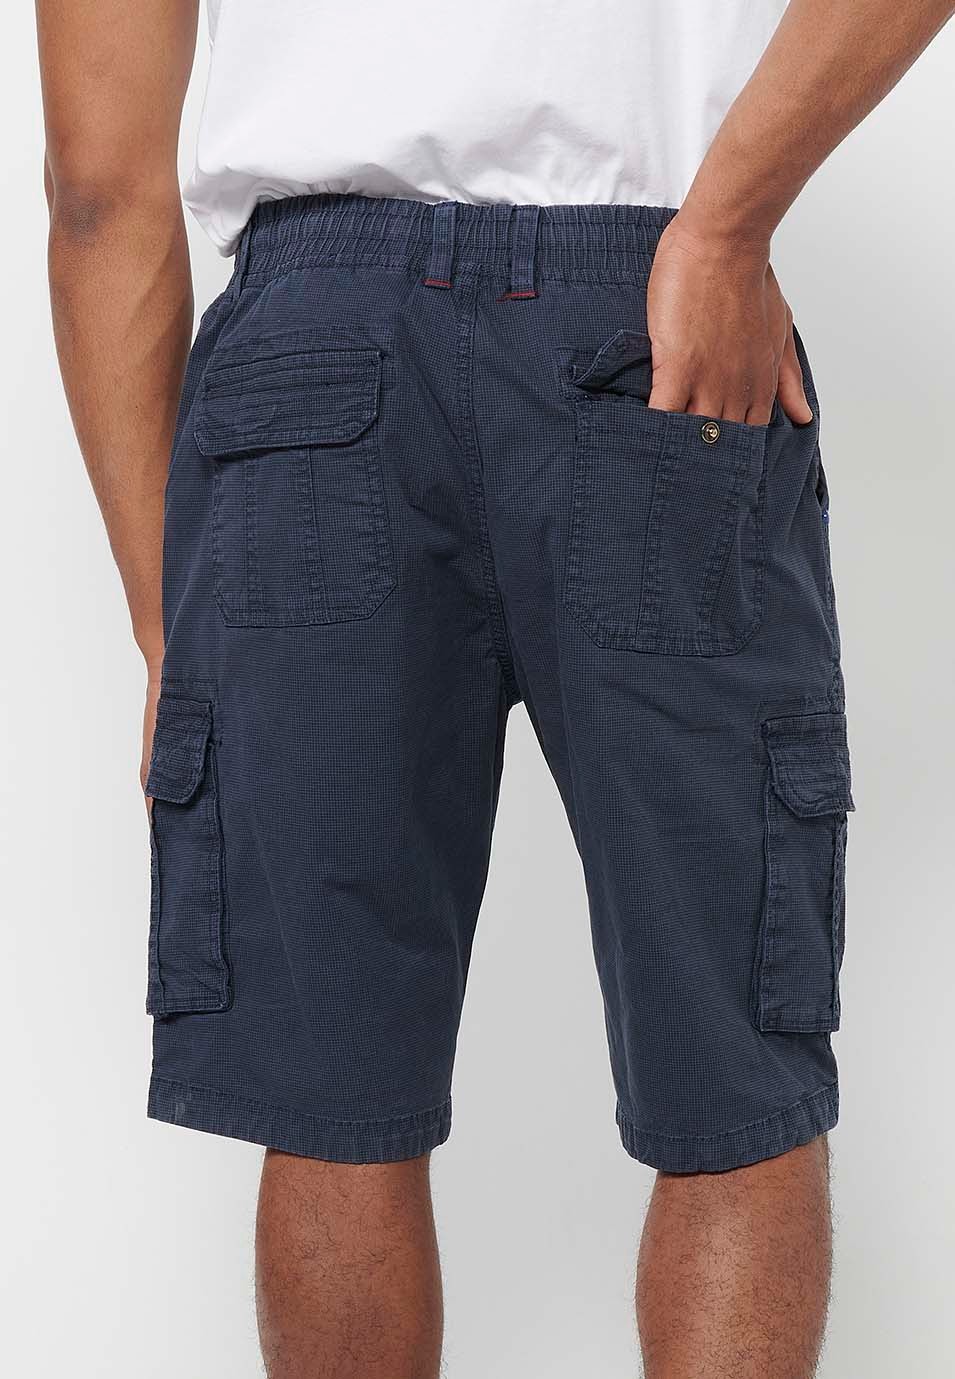 Cargo shorts with front closure with zipper and button and four pockets, two rear pockets with flap with two cargo pockets with flap and adjustable waist with drawstring in Navy Color for Men 6